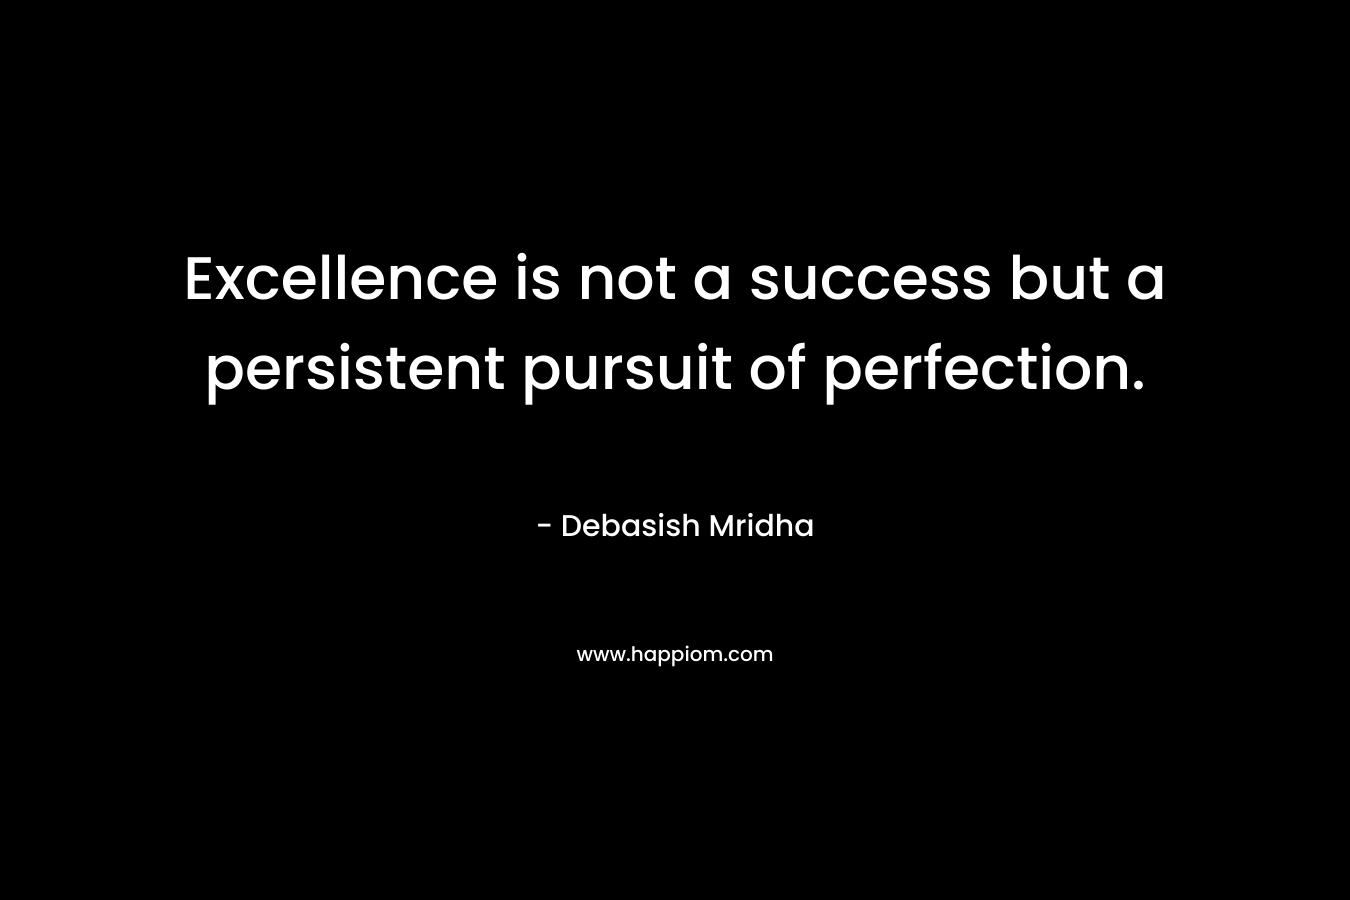 Excellence is not a success but a persistent pursuit of perfection. – Debasish Mridha